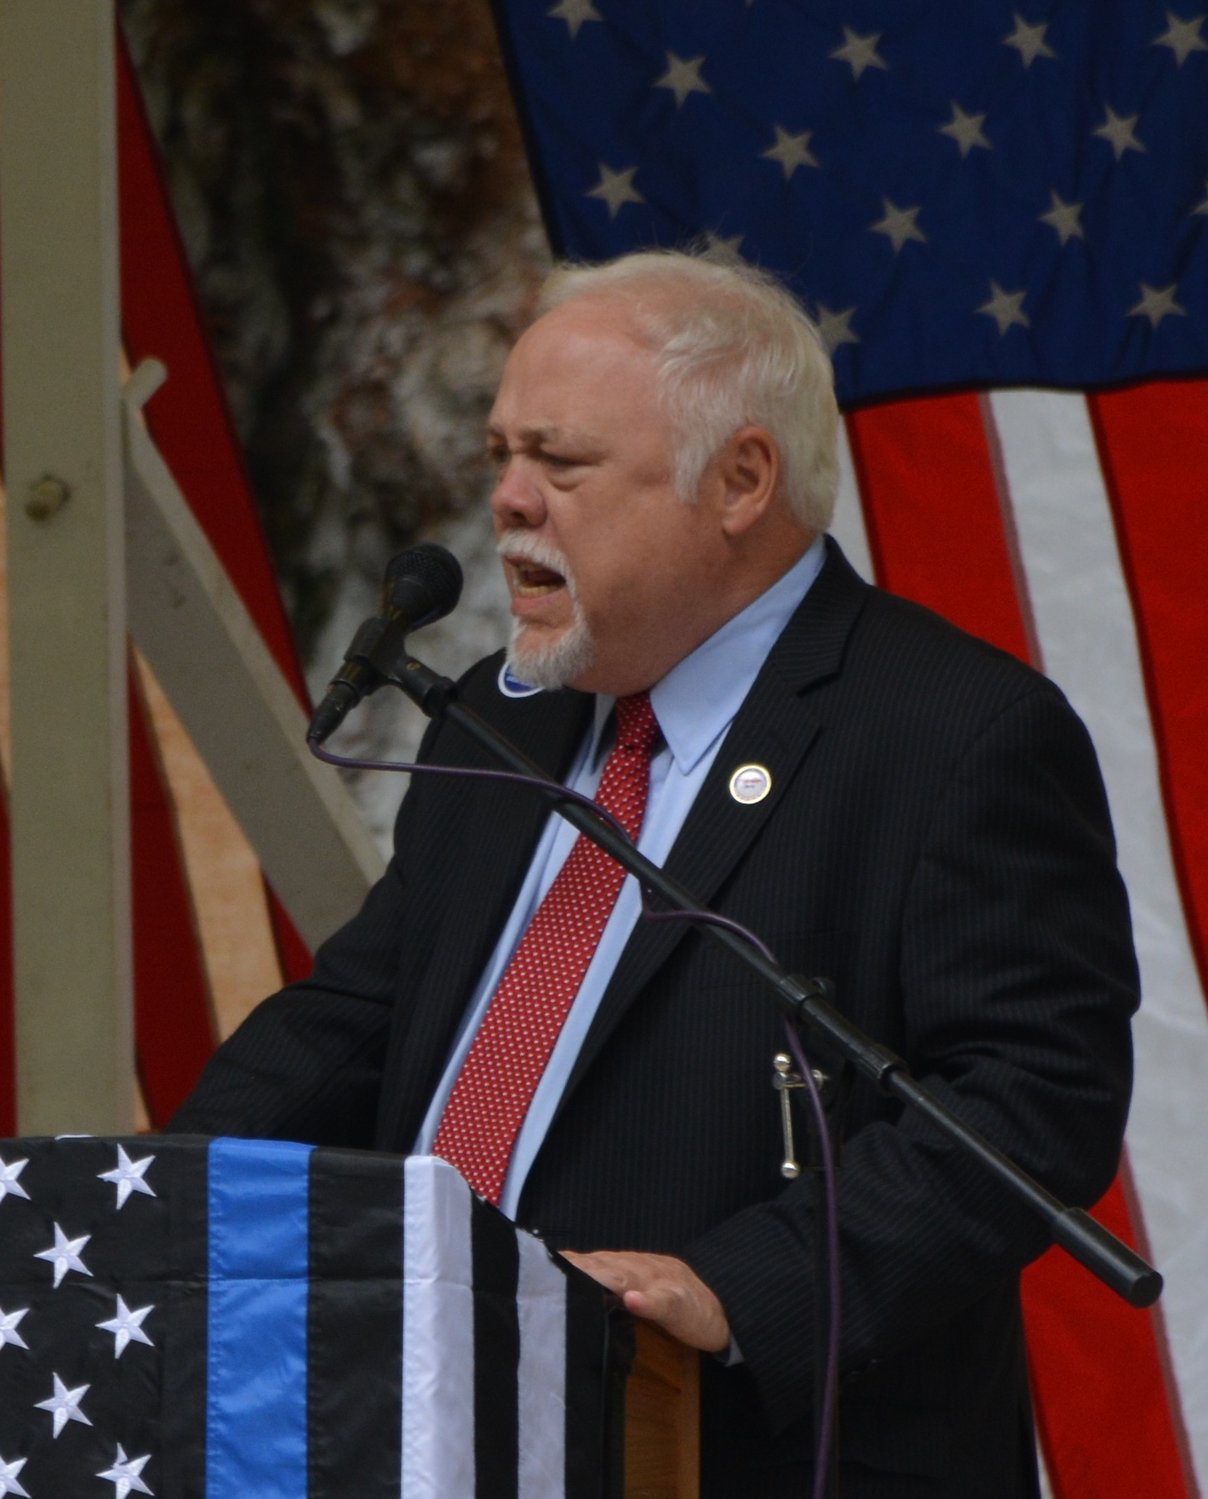 Former Washington State Senator Don Benton addresses a crowd gathered in support of then presidential candidate Donald Trump during a rally last year. Benton was recently appointed to the U.S. Selective Service Systems as its director.